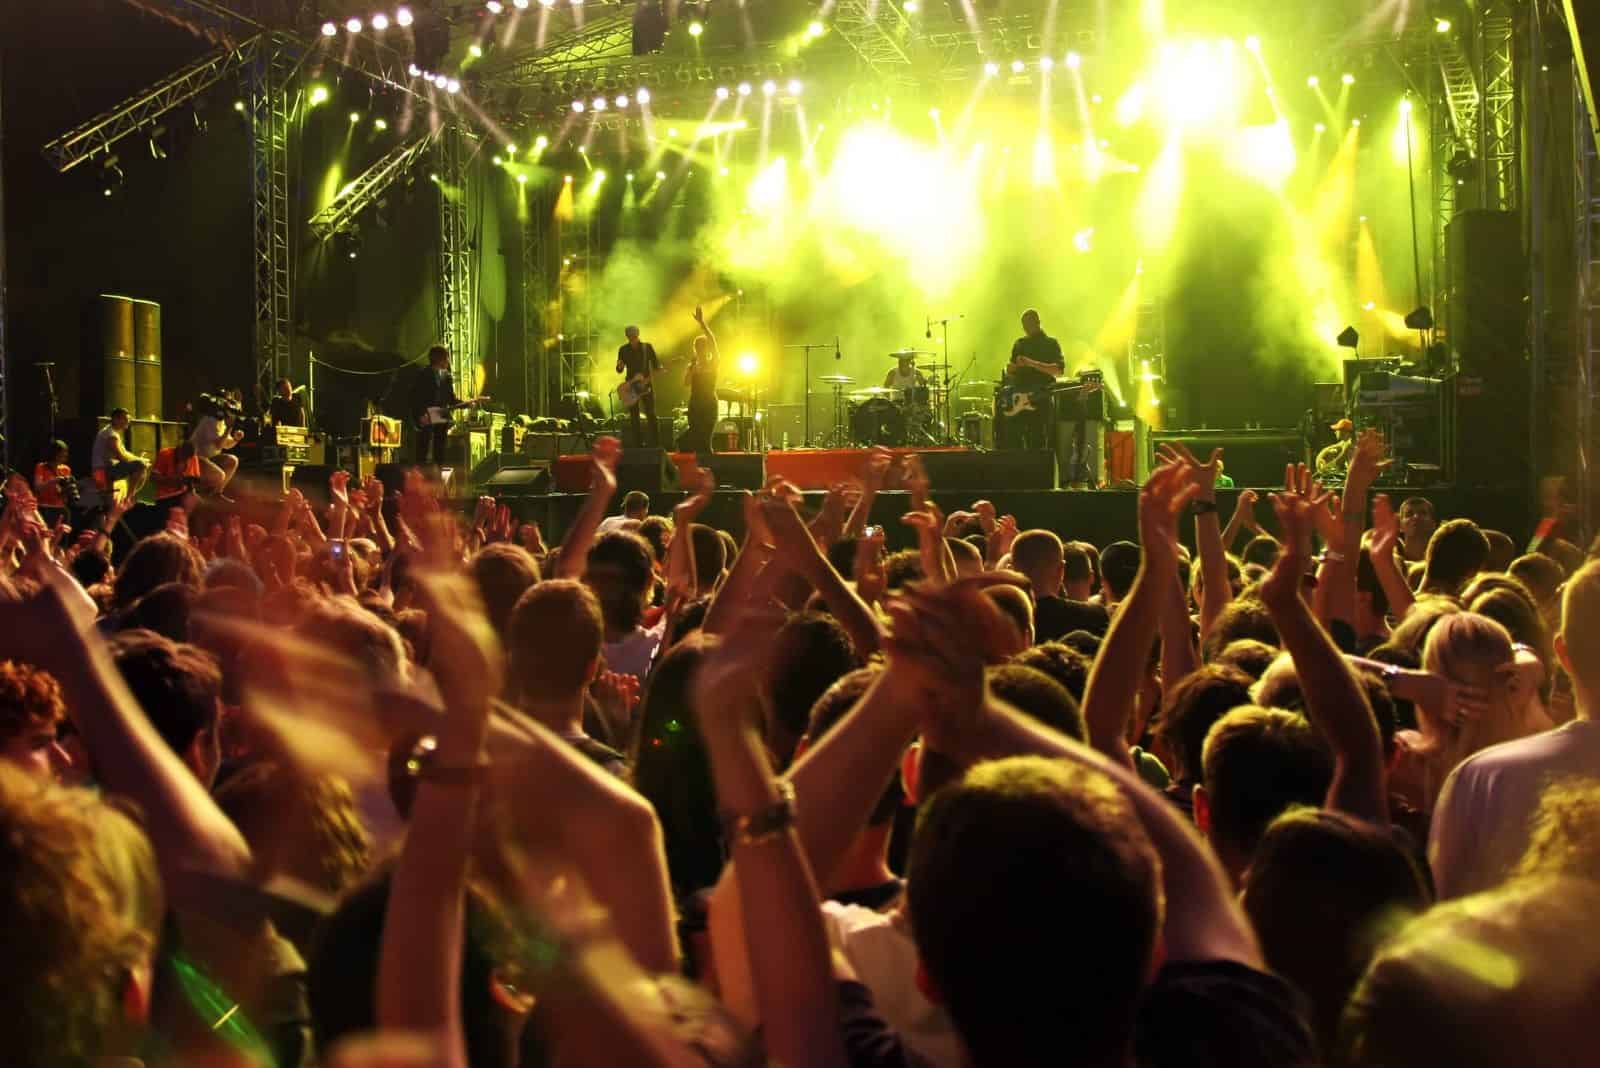 watch out for noisy outdoor events this summer